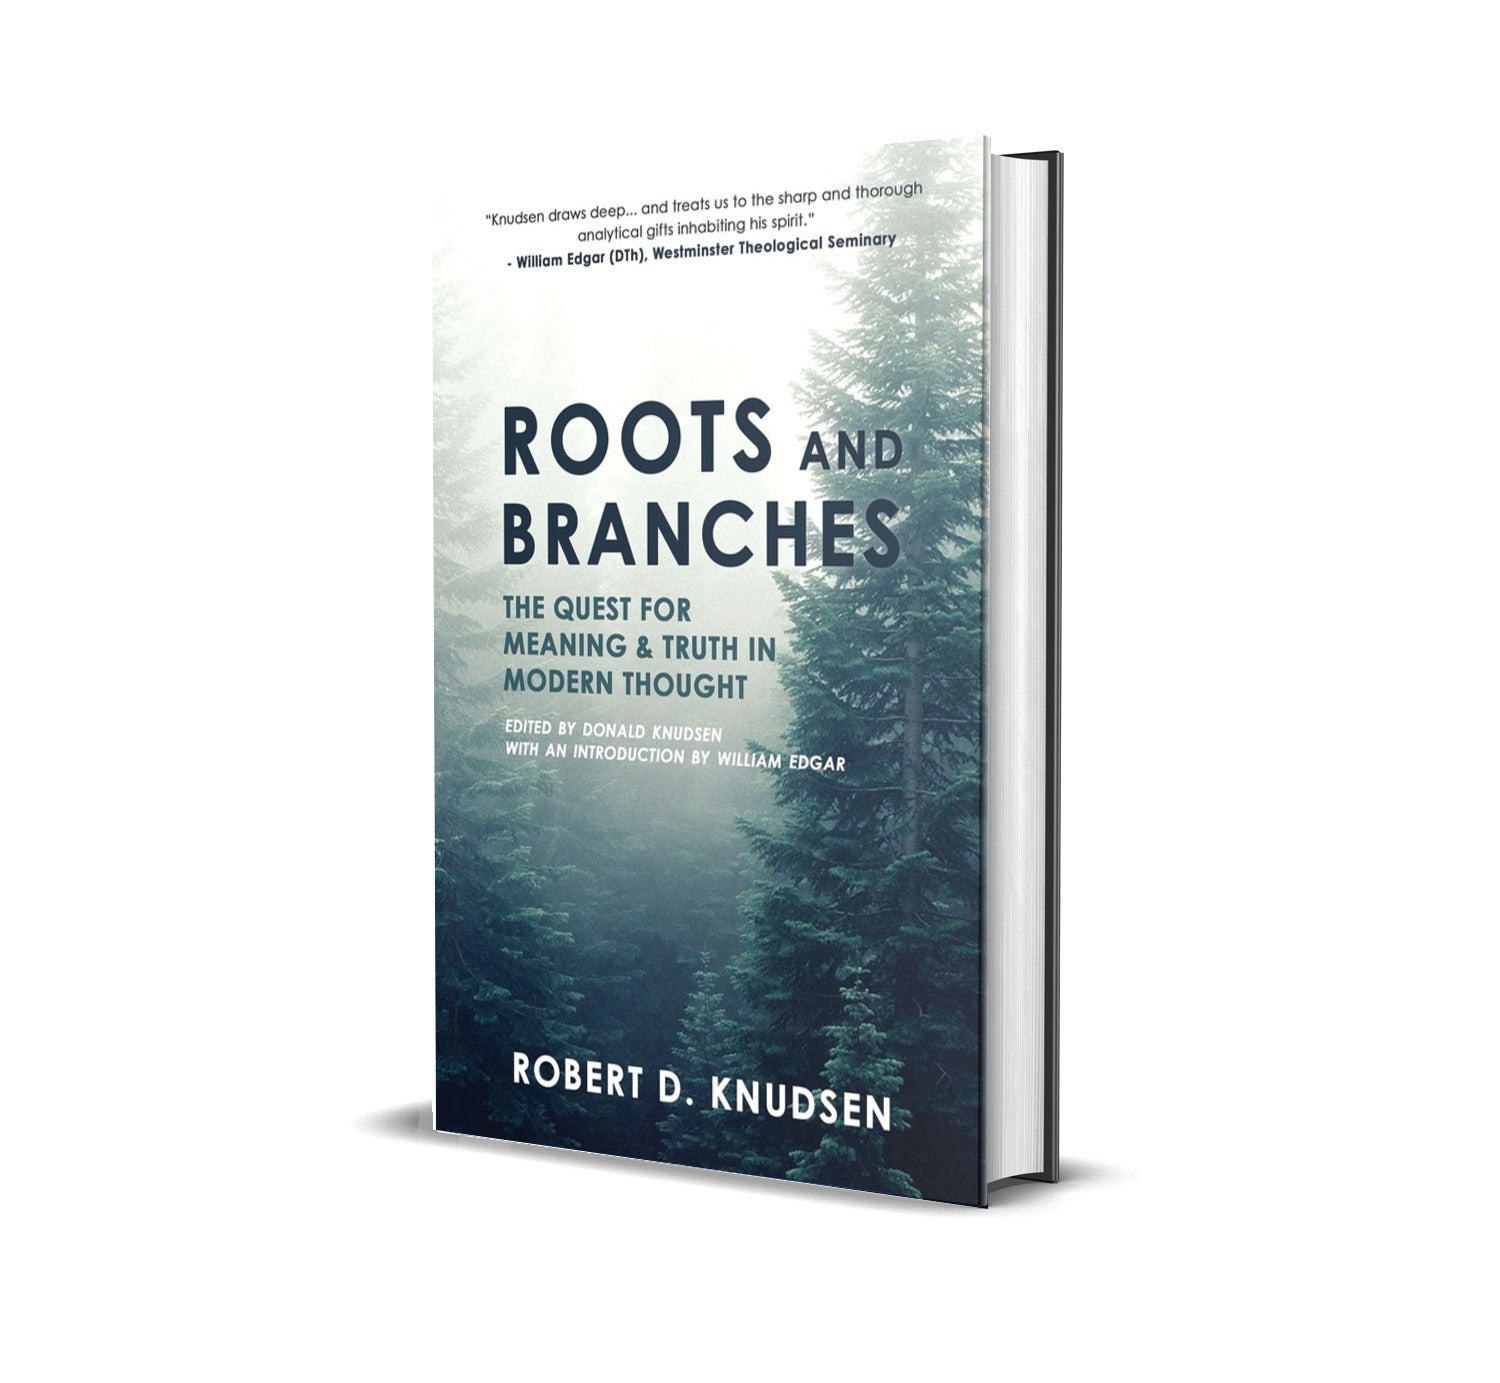 Roots and Branches: The quest for Meaning & Truth in Modern Thought